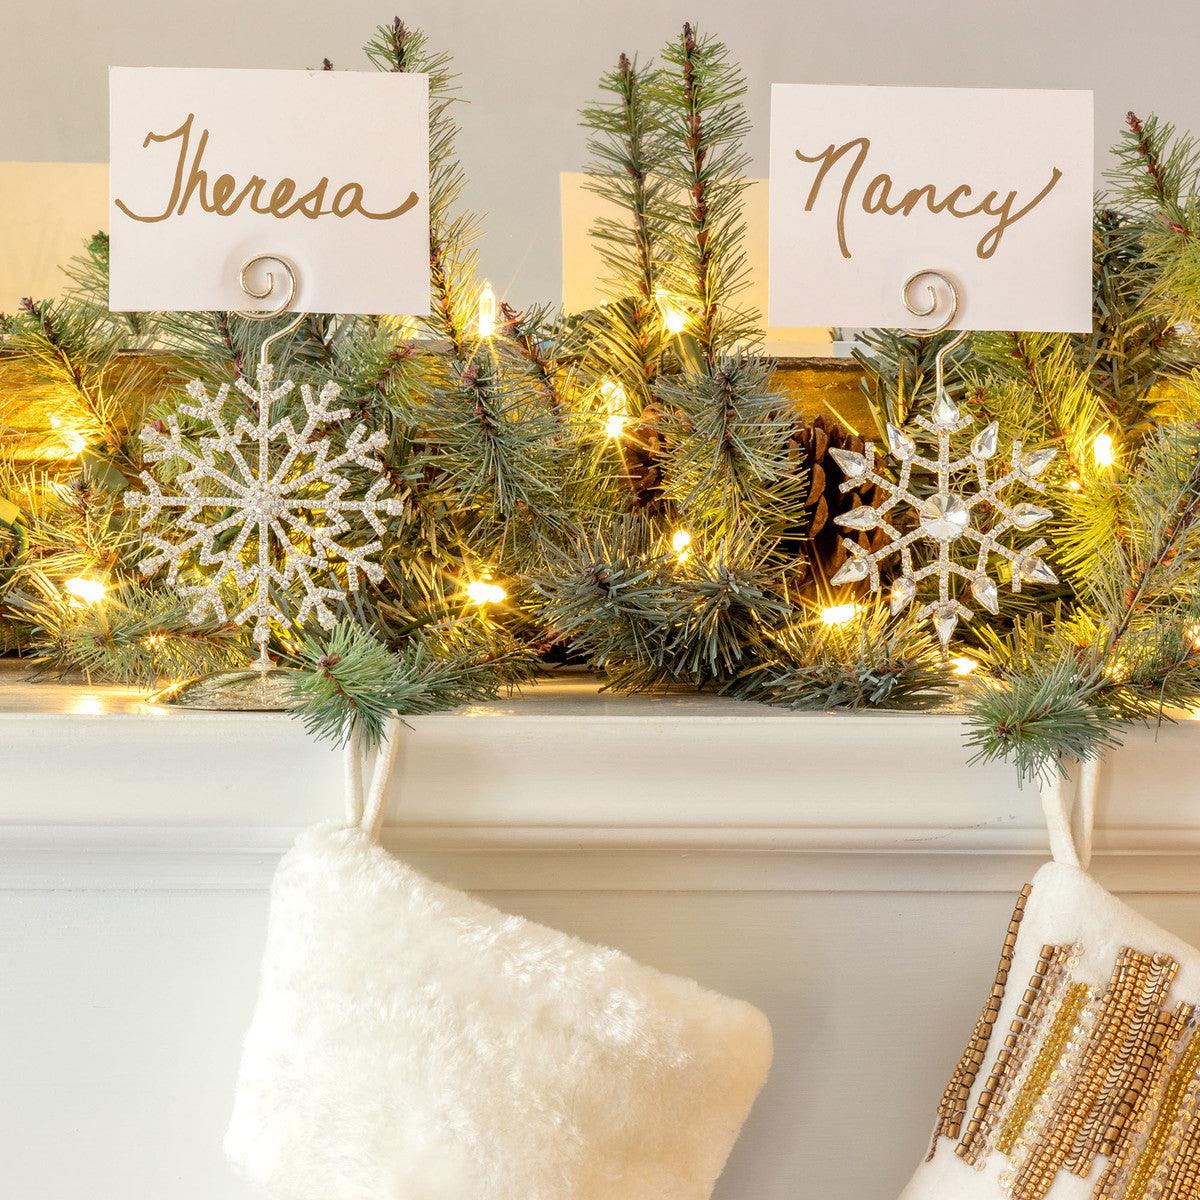 Snowflake Splendor Place Card Holders - Signastyle Boutique